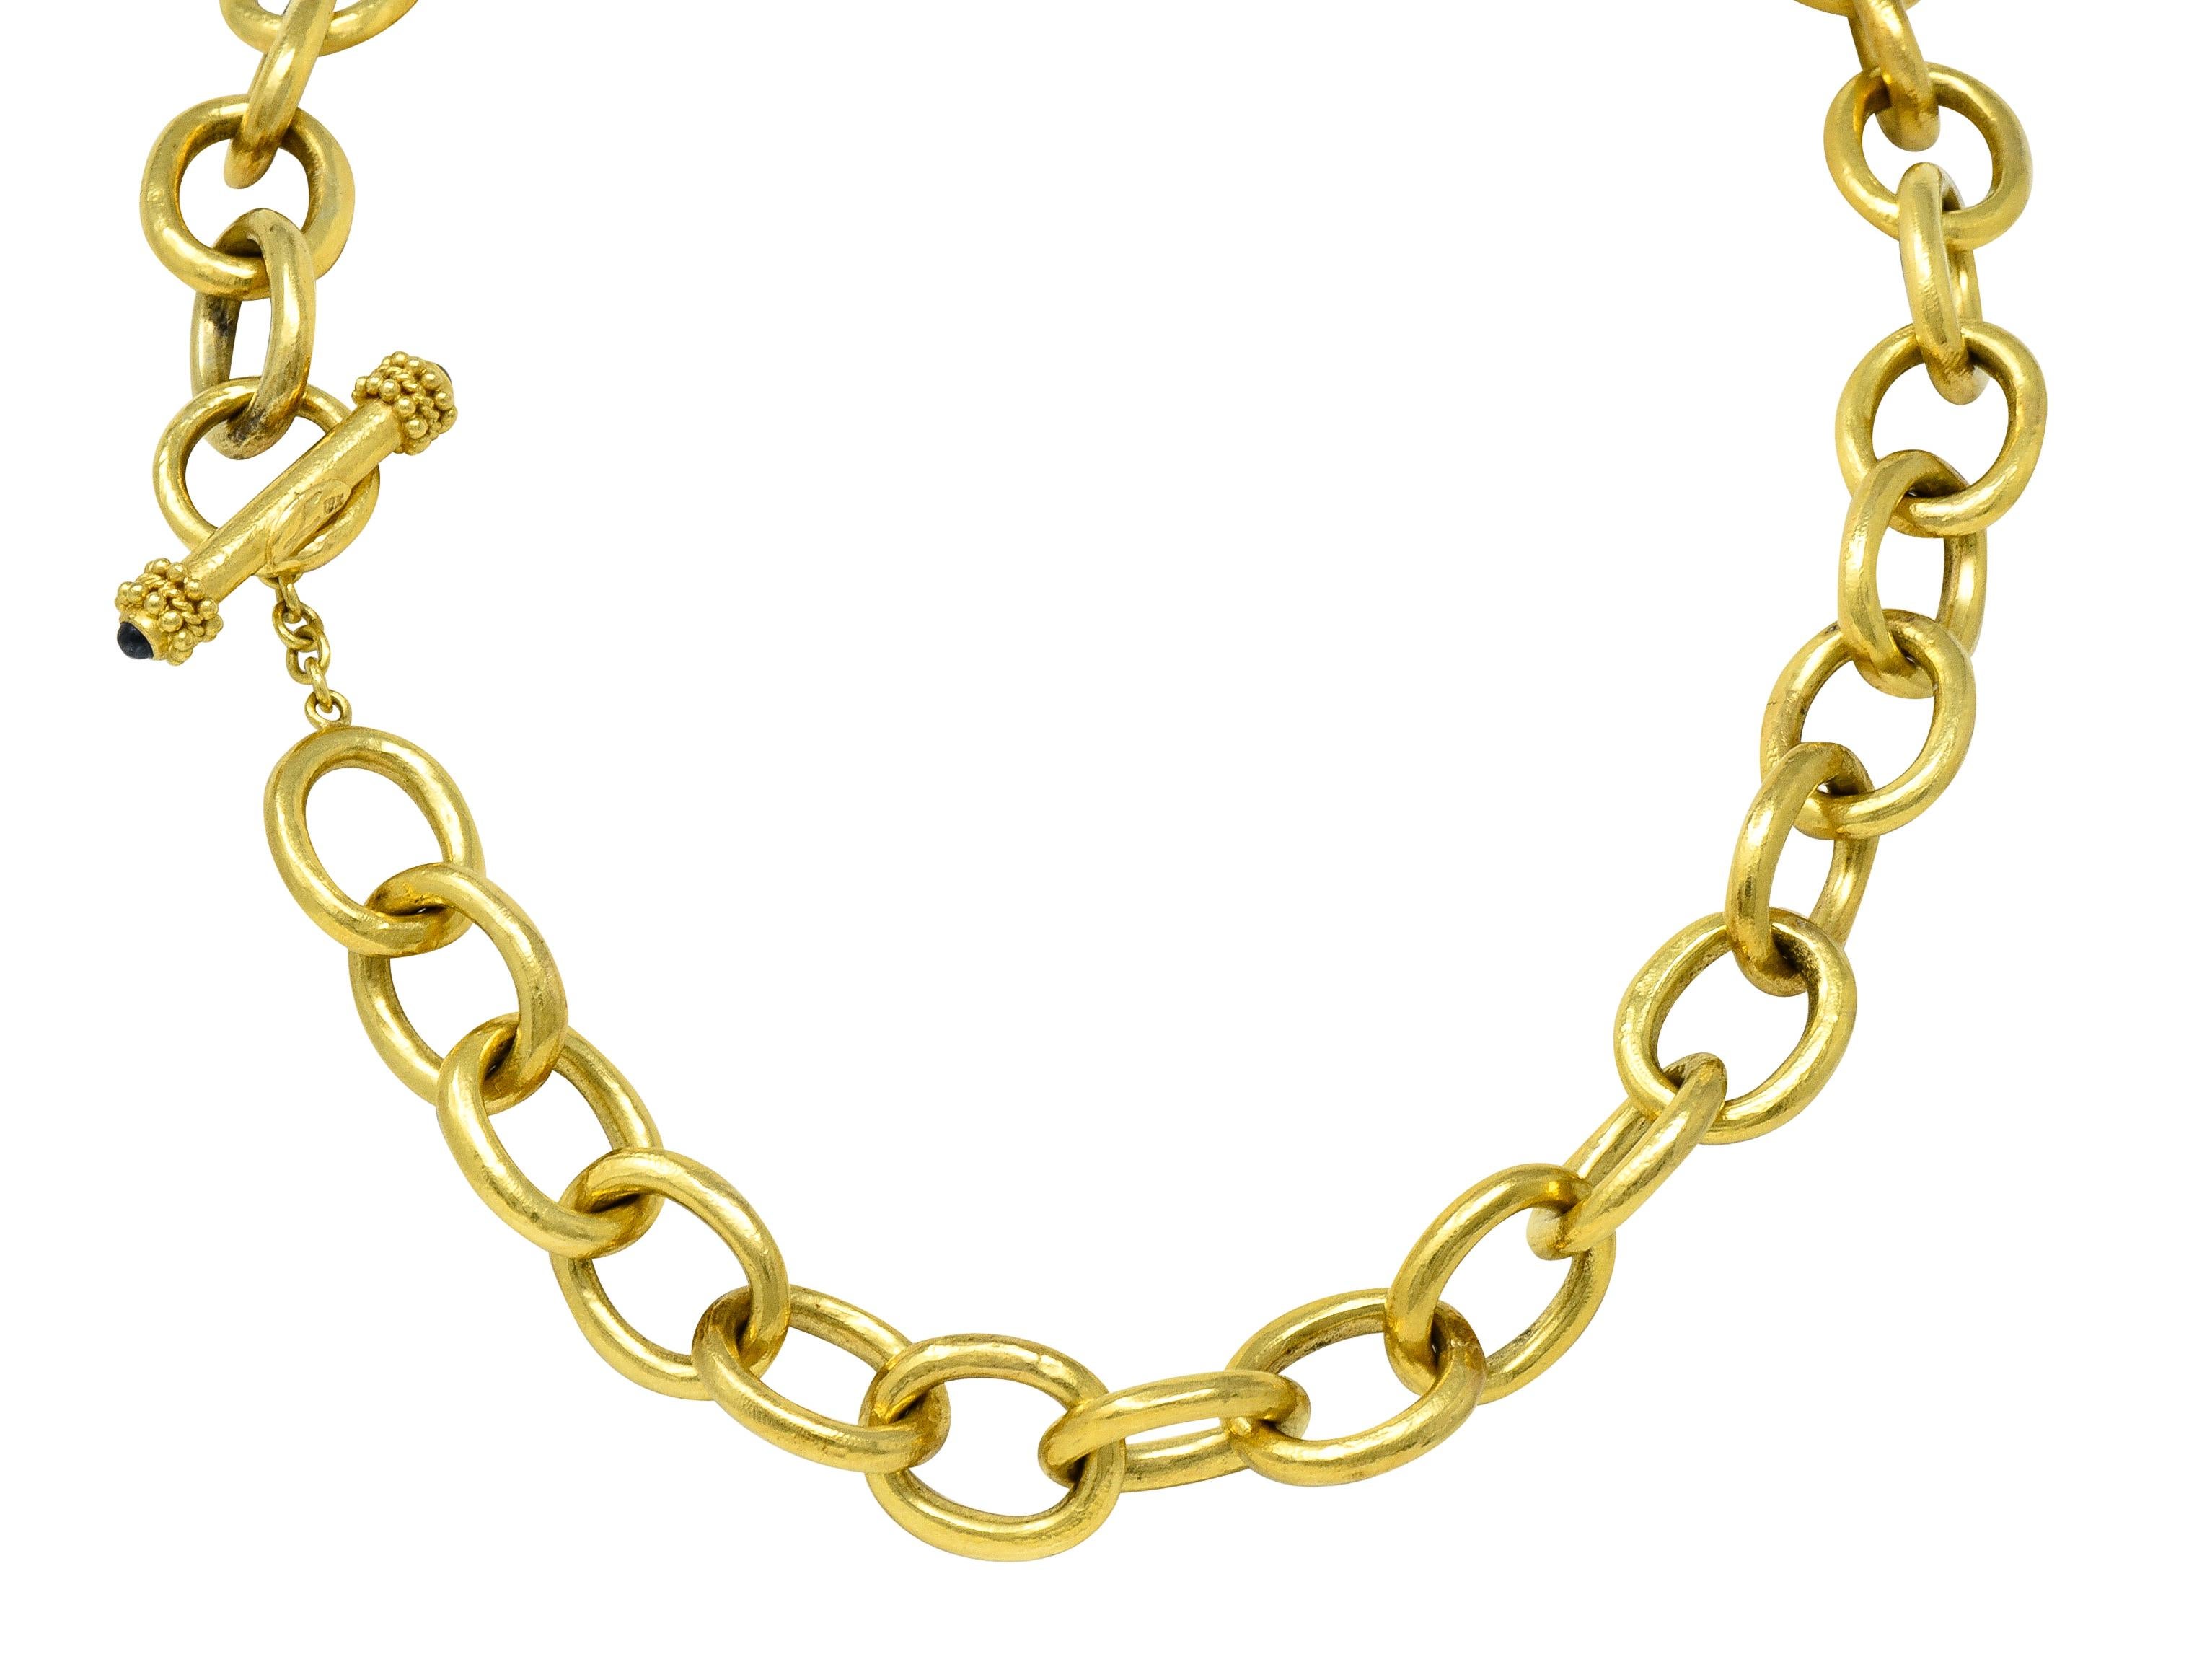 Elizabeth Locke 1990's Sapphire 18 Karat Gold Cable Link Chain Vintage Necklace In Excellent Condition For Sale In Philadelphia, PA